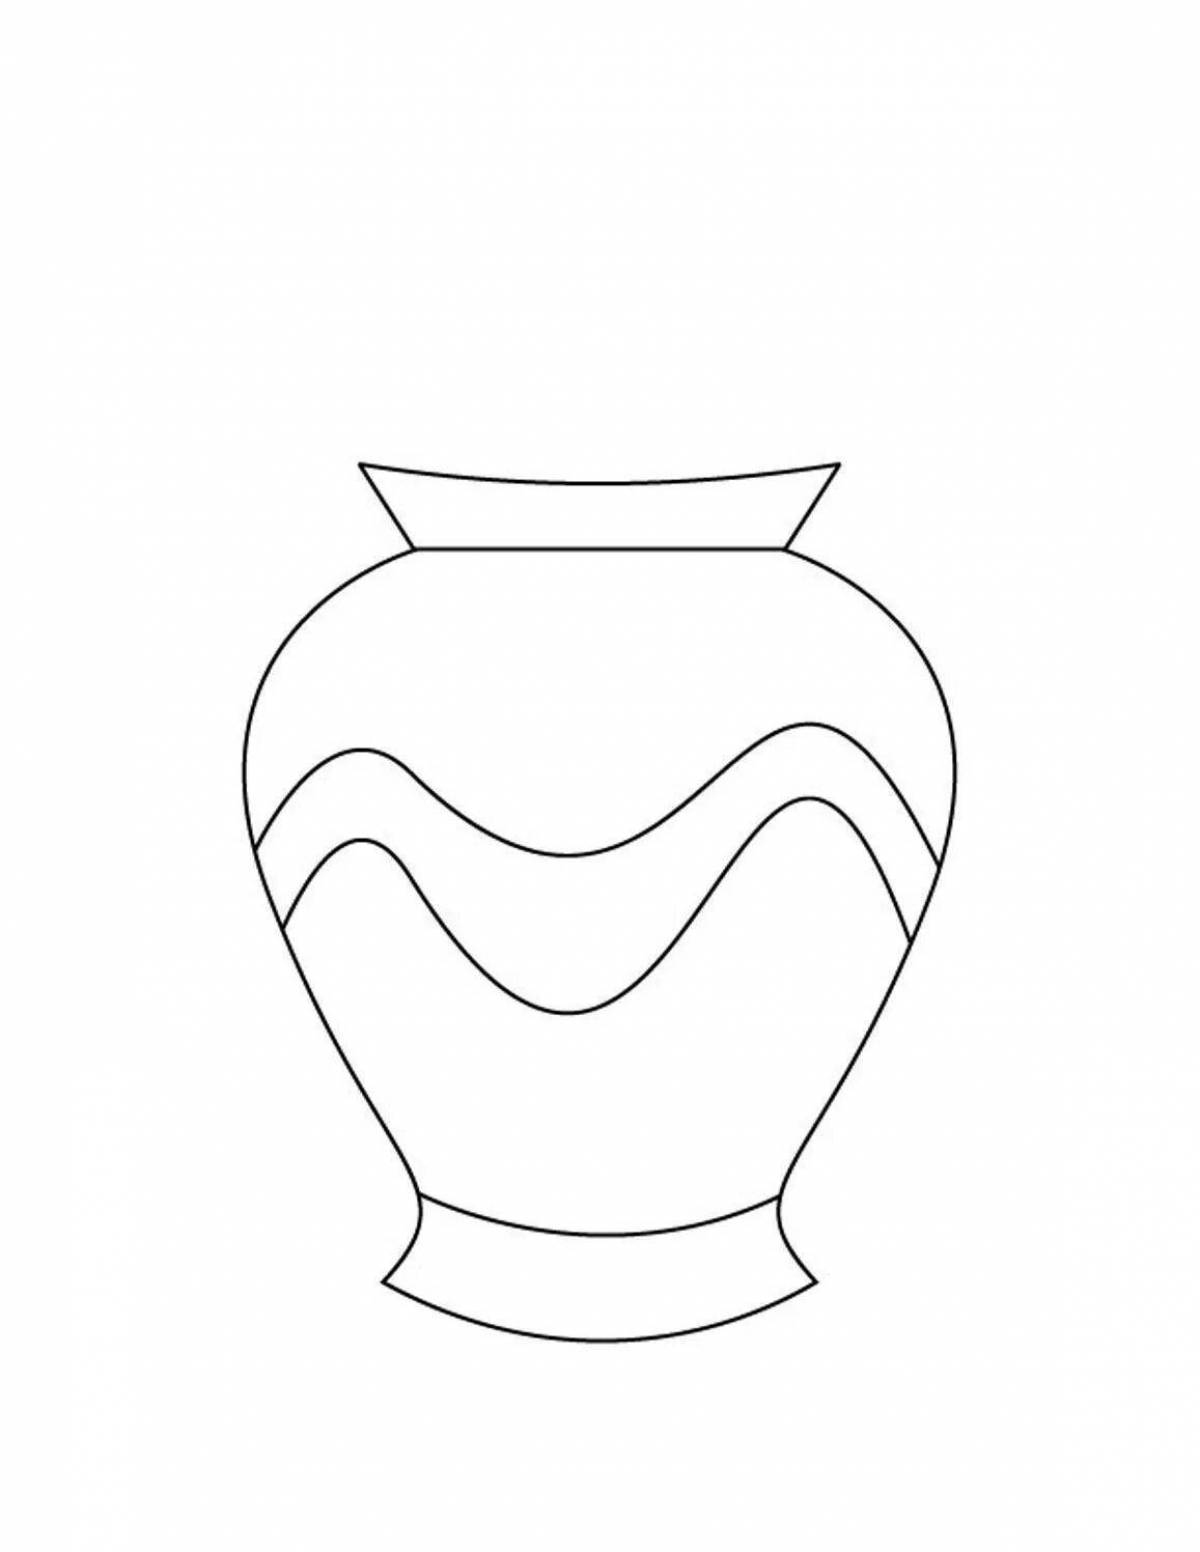 Outstanding vase pattern coloring page